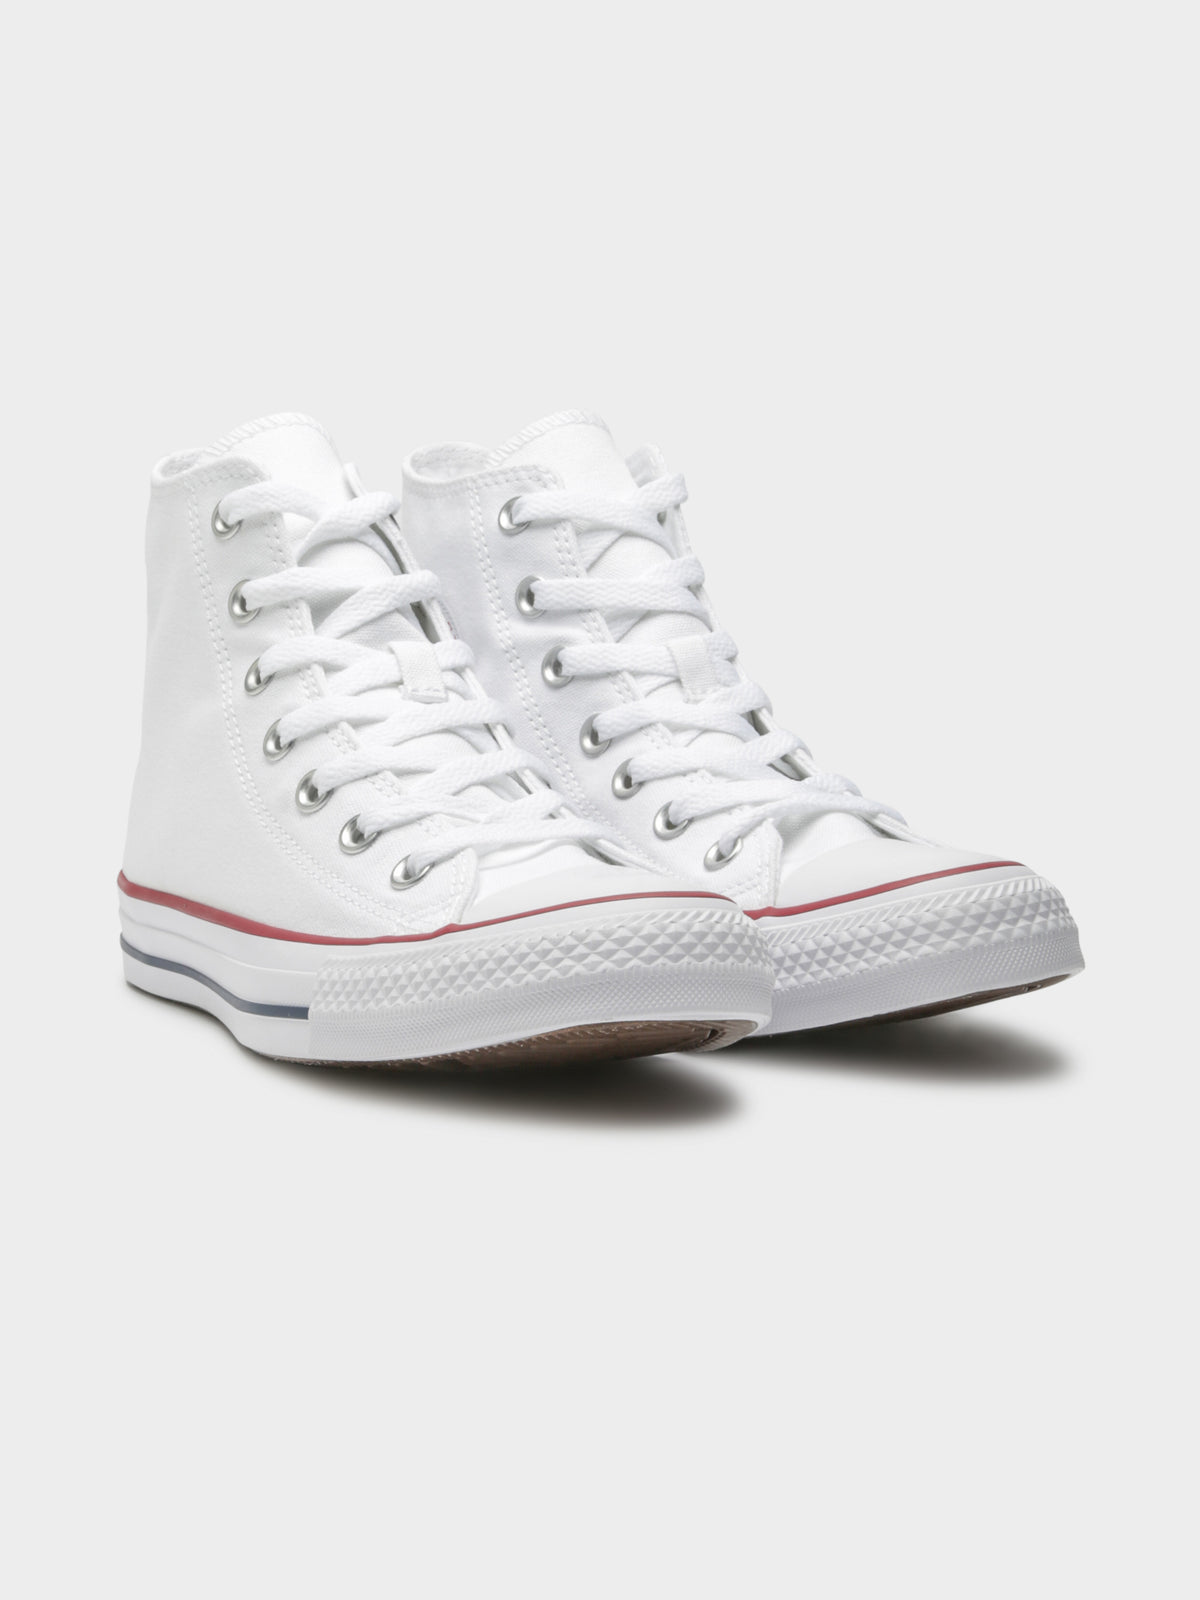 Unisex Chuck Taylor All Star High Top Sneakers in Optic White